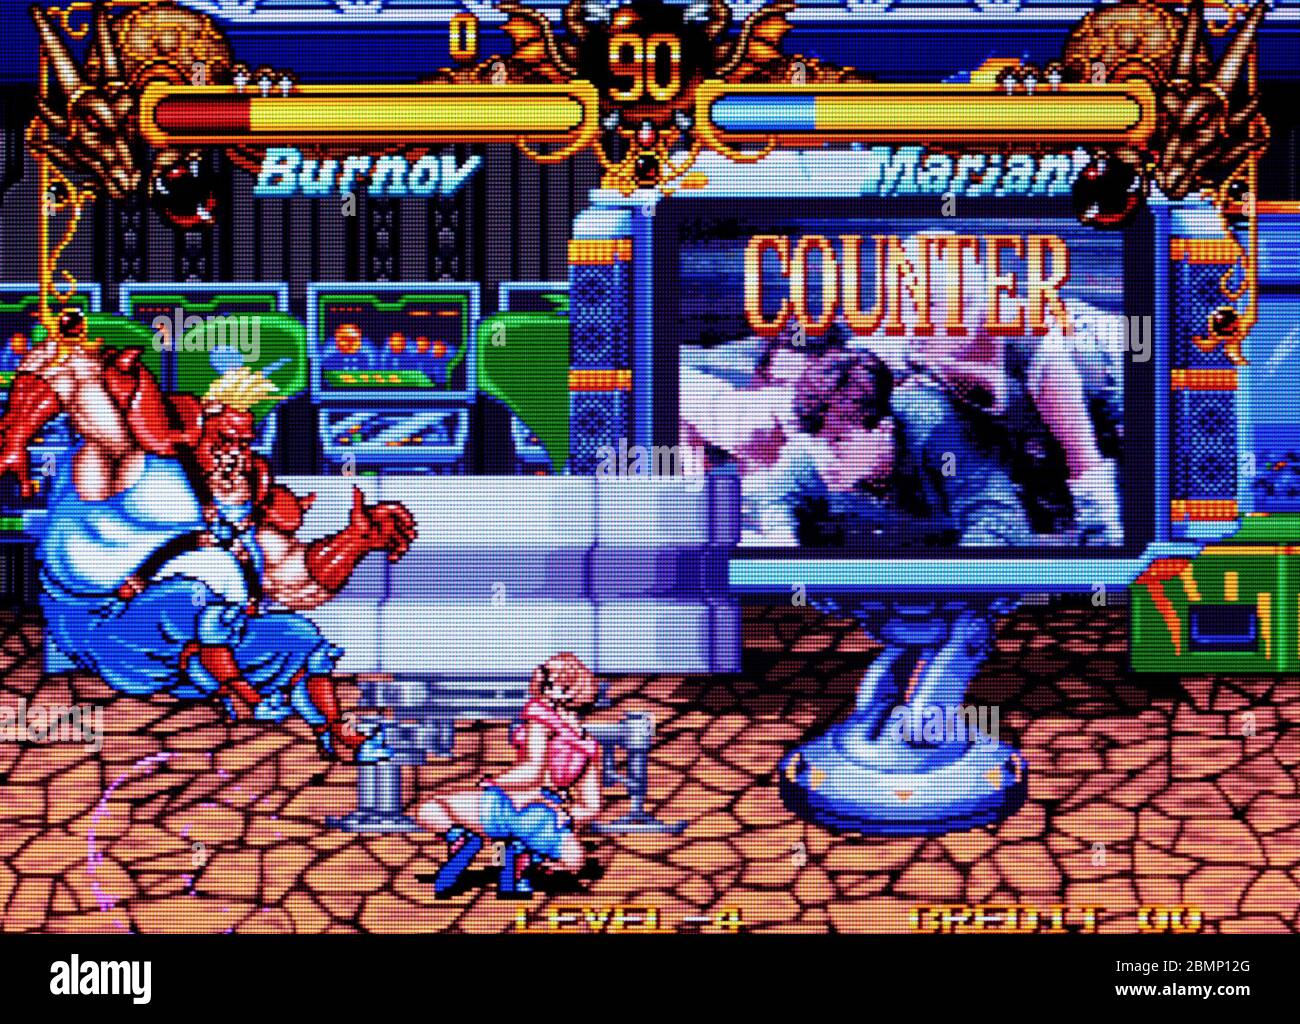 MFG: Double Dragon (Neo Geo) - Marian stage [2 versions]